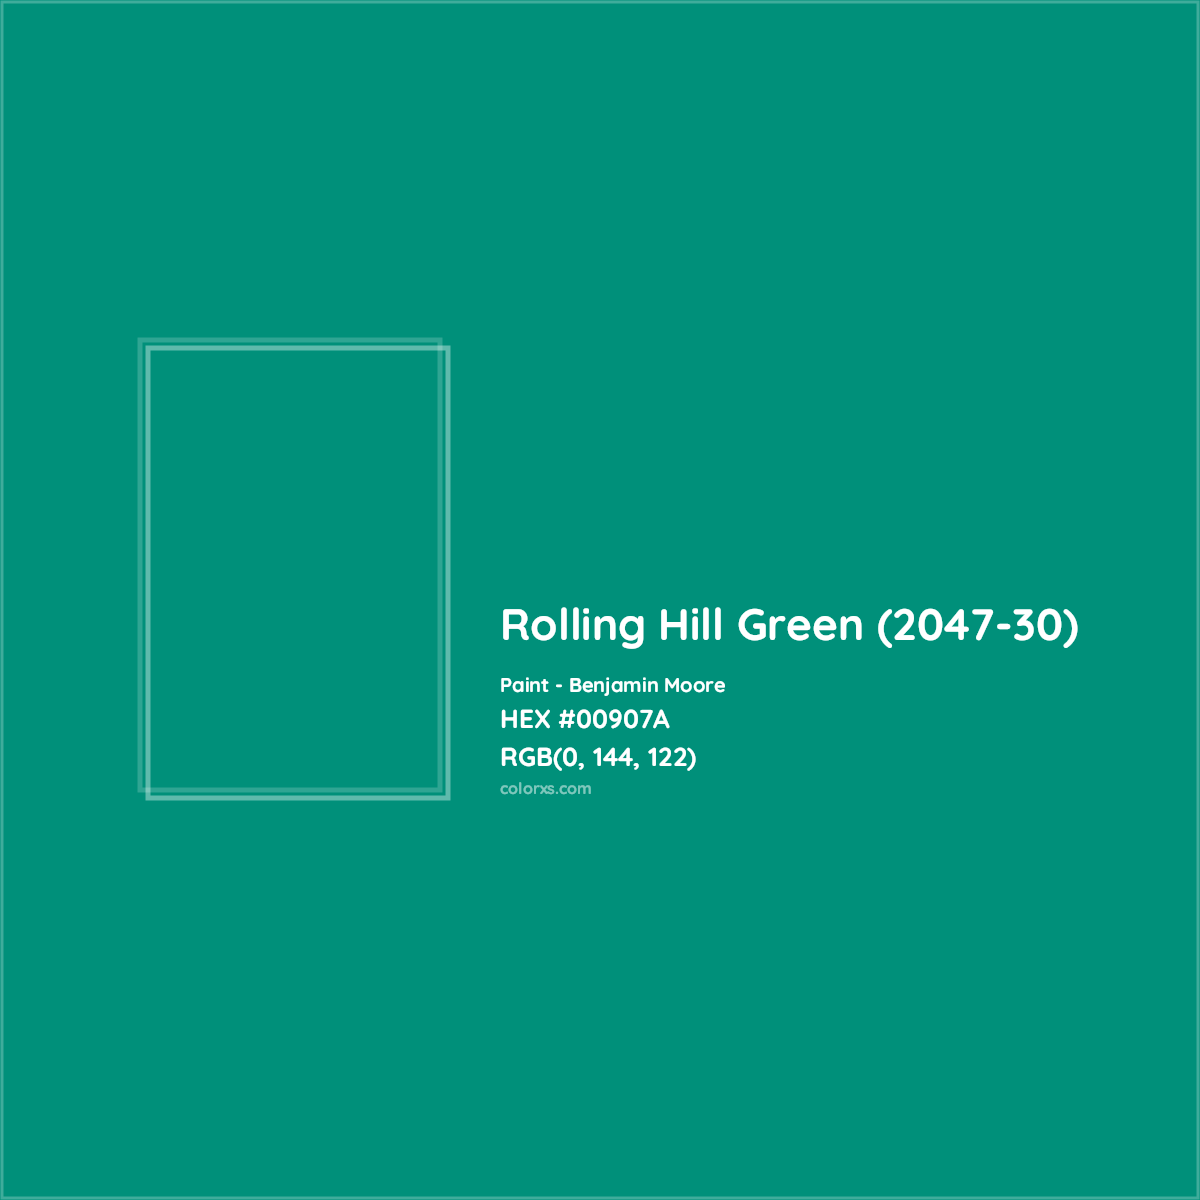 HEX #00907A Rolling Hill Green (2047-30) Paint Benjamin Moore - Color Code